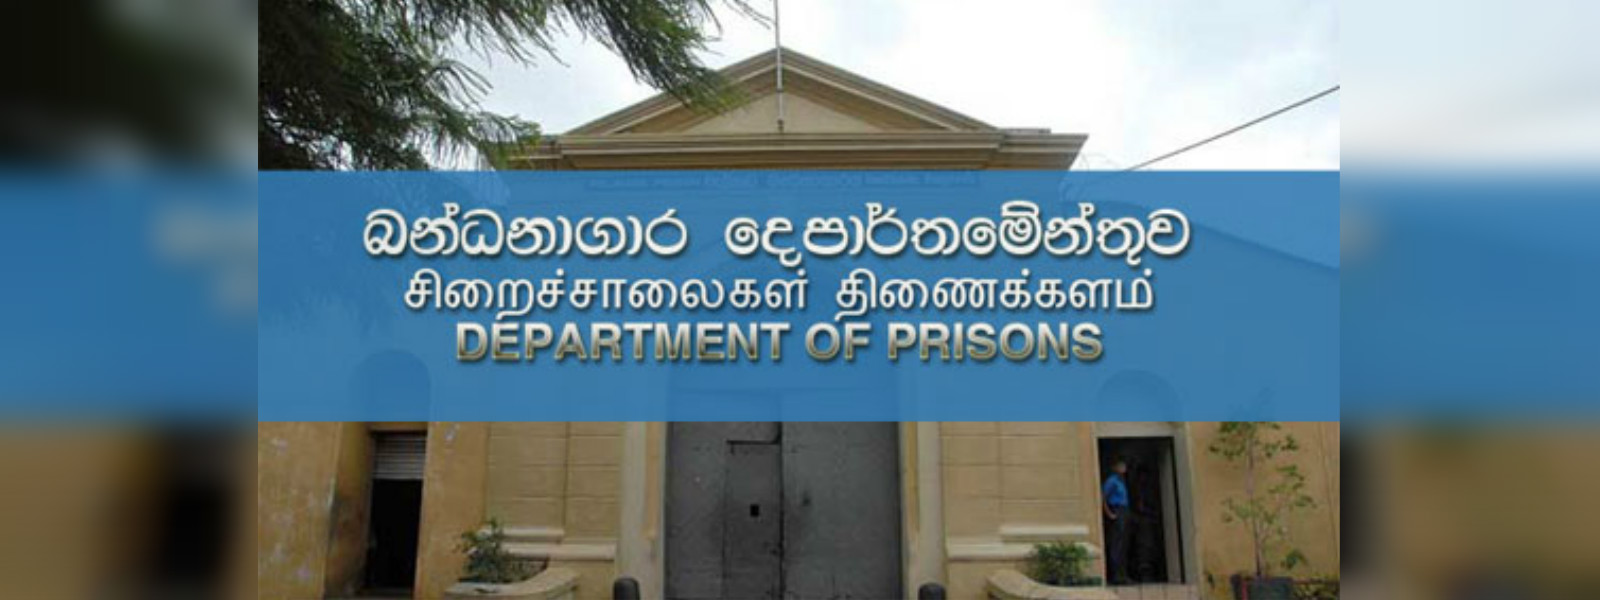 Department of Prisons to employ inmates prior to their release